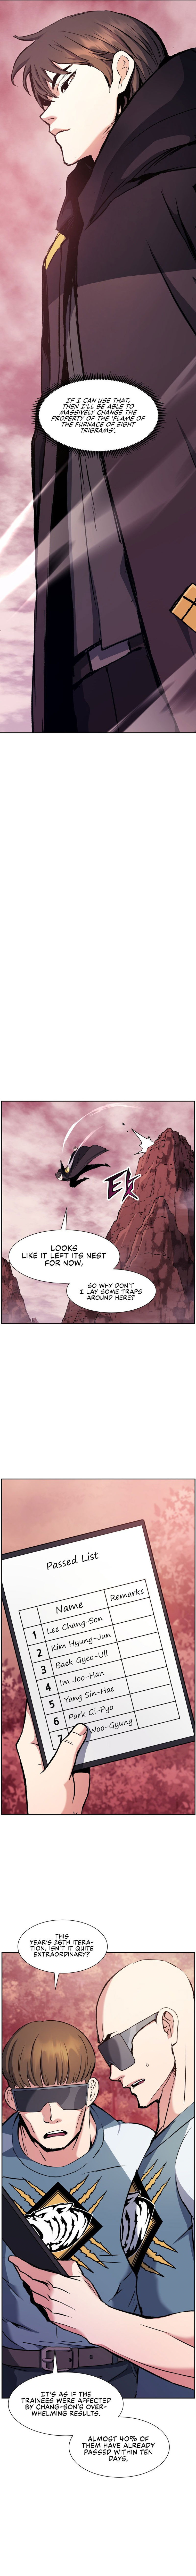 return-of-the-shattered-constellation-chap-34-14